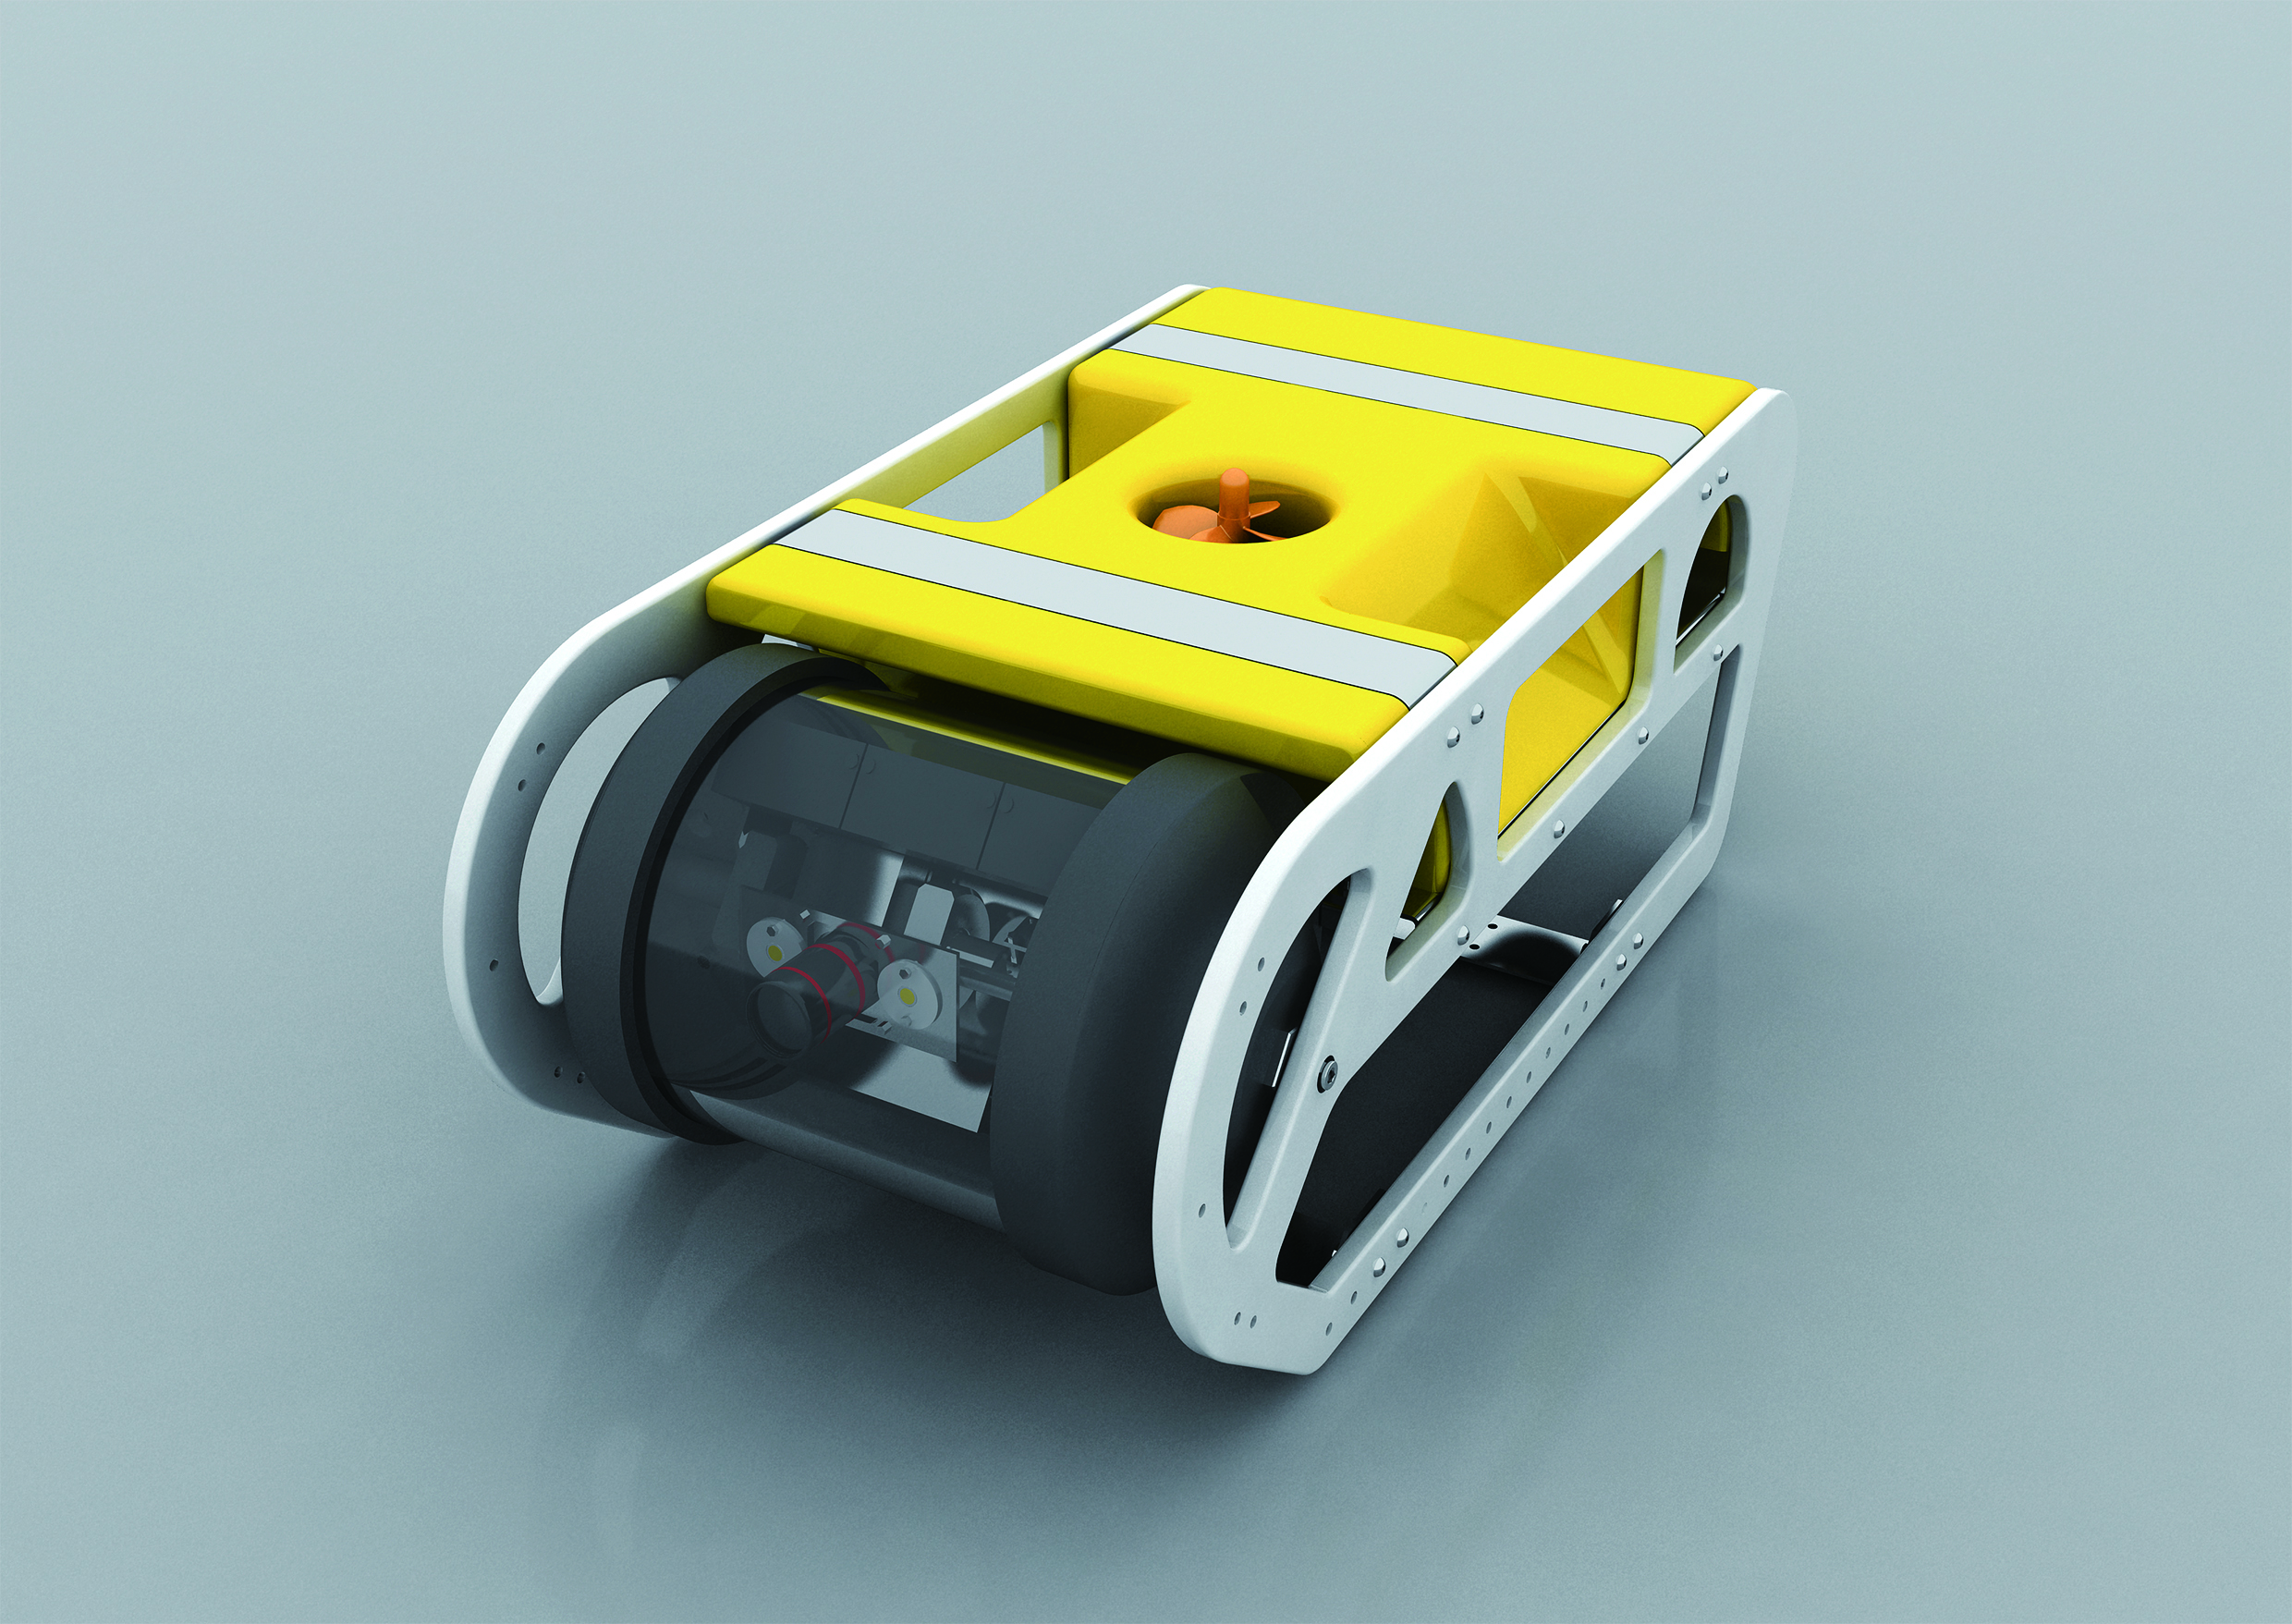 OB10 Type Remotely Operated Vehicle